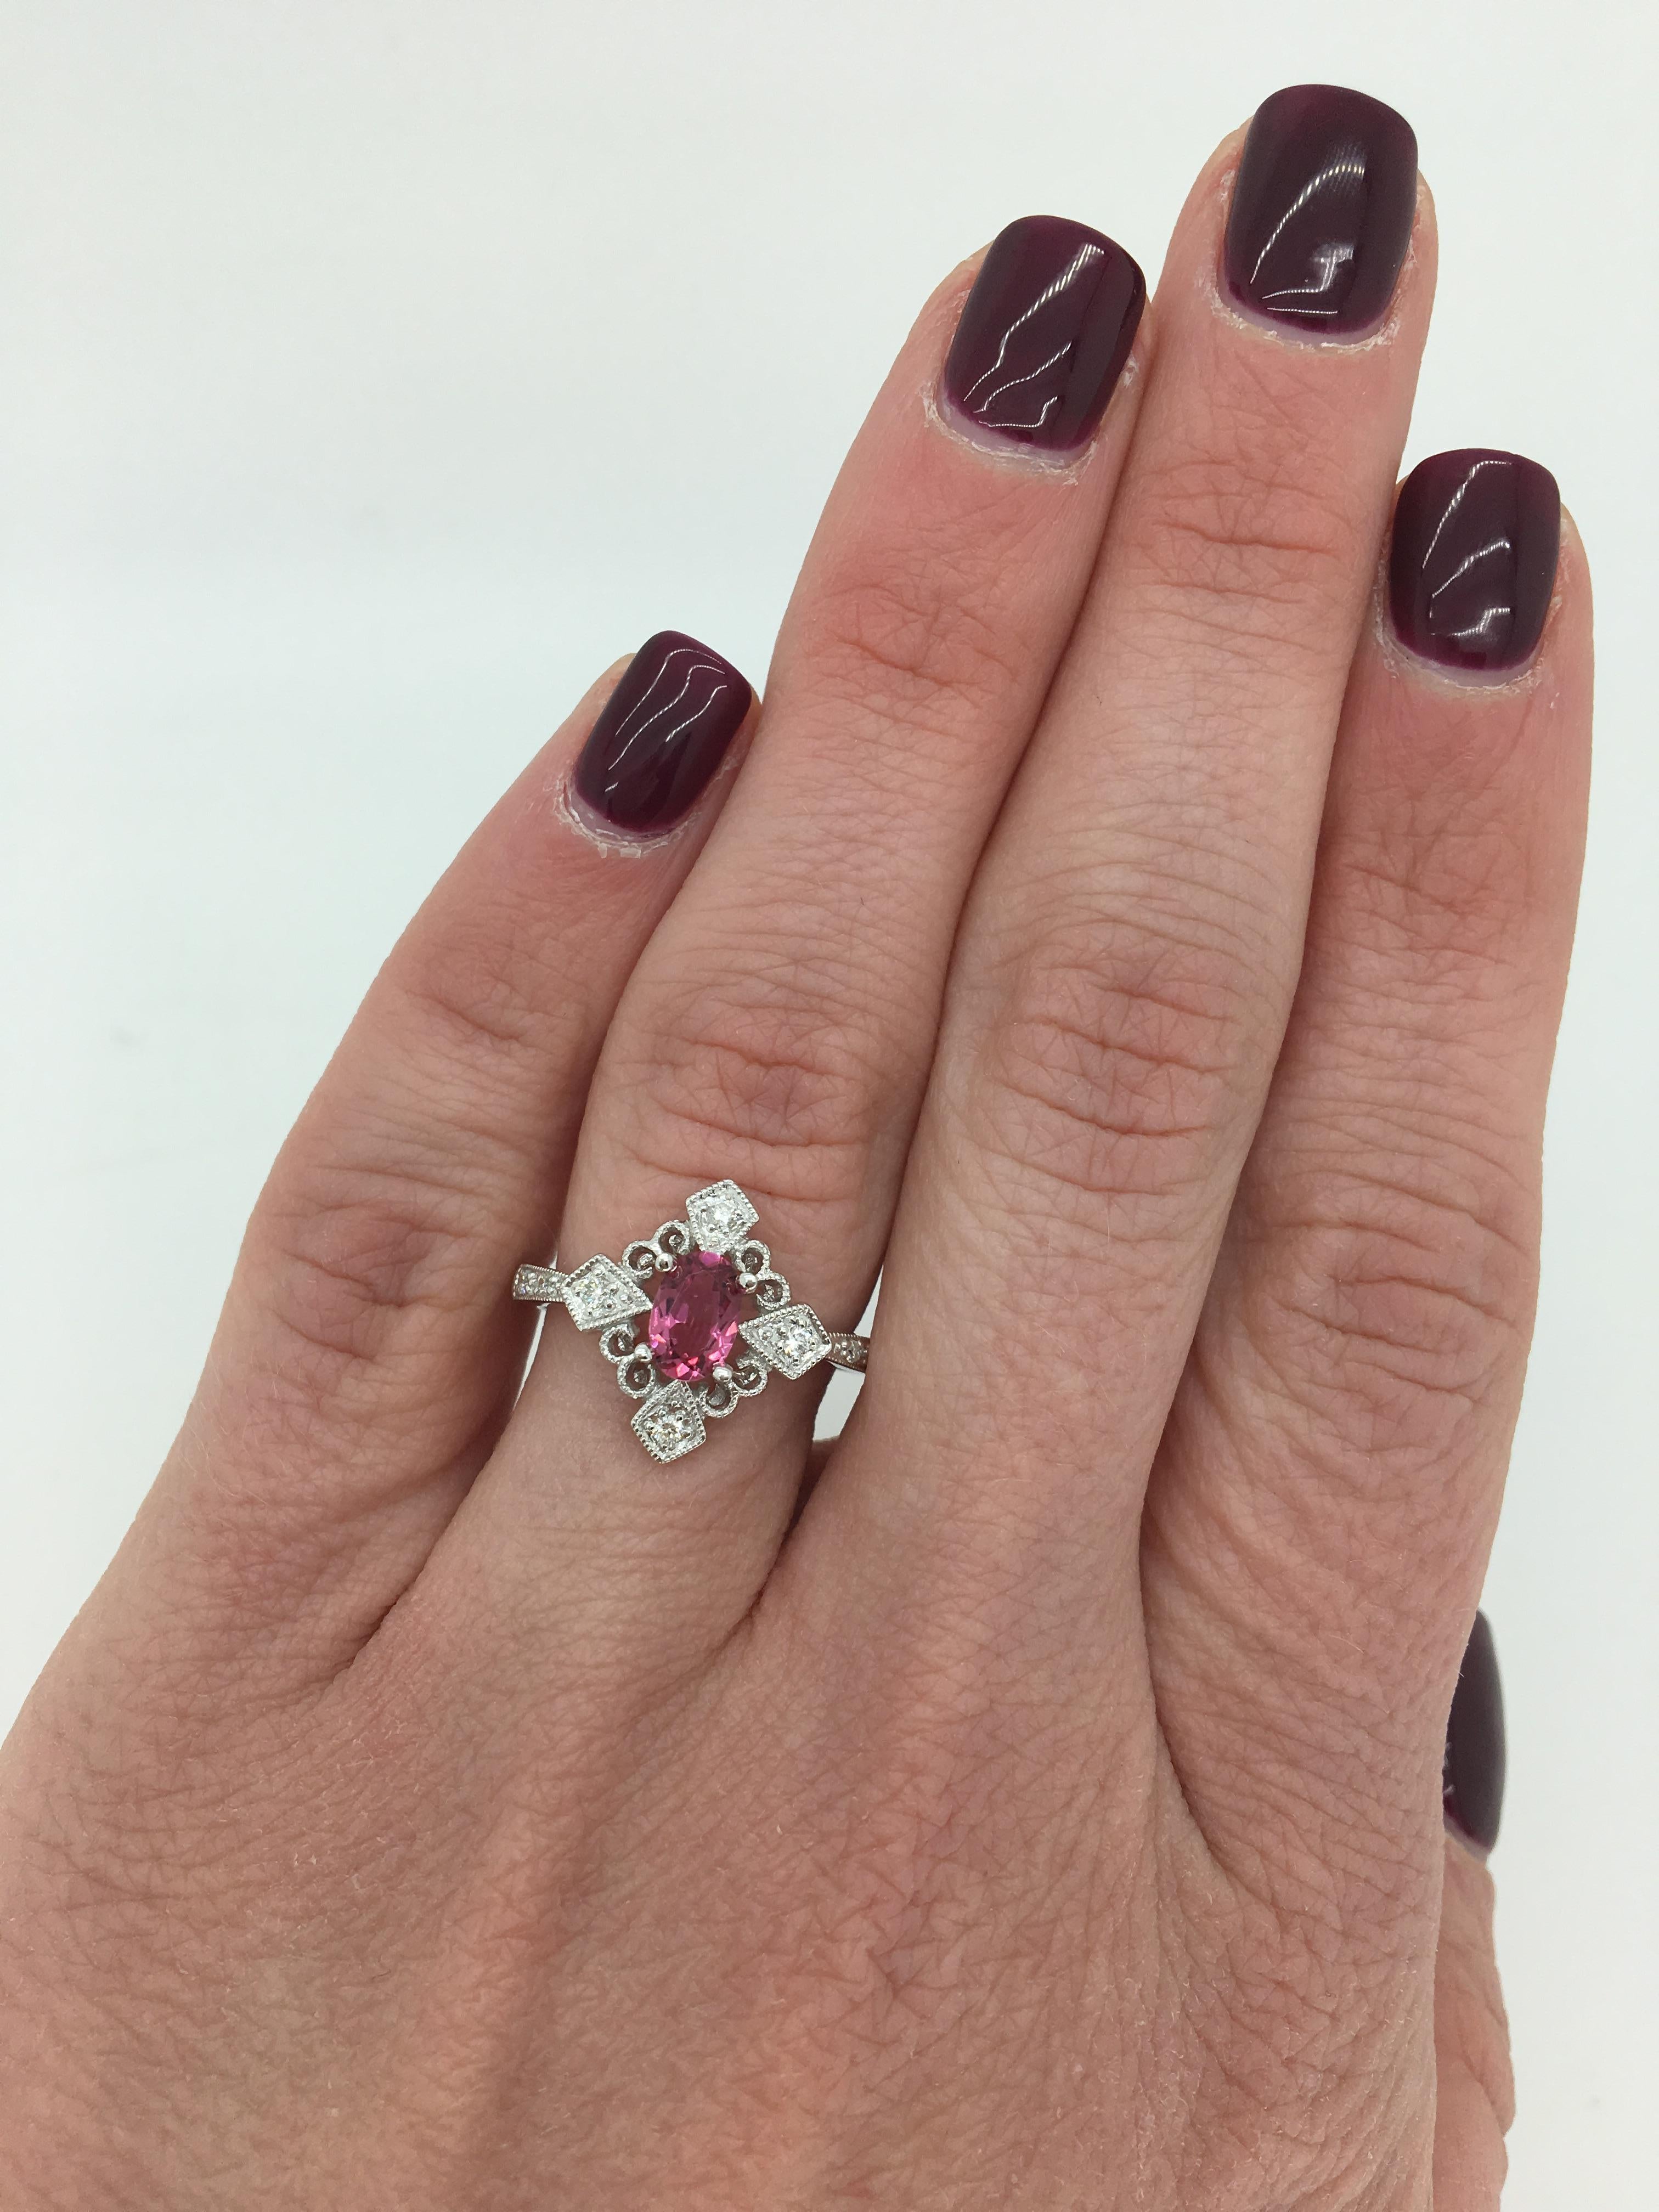 Vintage inspired Pink Tourmaline & Diamond ring with ornate filigree detail crafted in 14k white gold.

Gemstone: Pink Tourmaline & Diamond
Gemstone Carat Weight: Approximately 4.10x6.08mm Pink Tourmaline
Diamond Carat Weight: Approximately